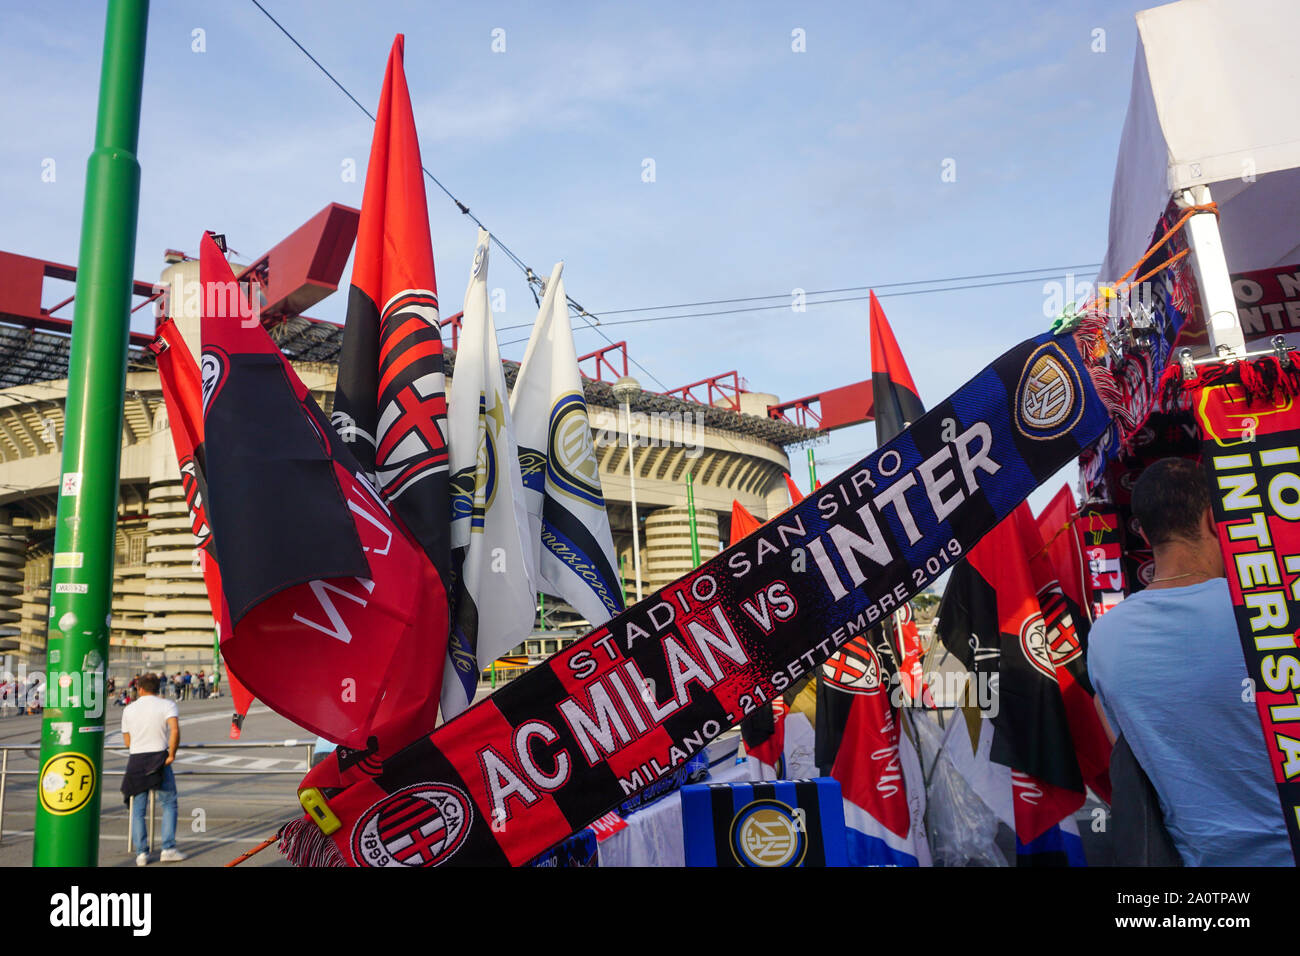 MILAN, ITALY - SEPTEMBER 21: View outside the stadium of San Siro with the  scarf of the derby during the Seria A match between AC Milan vs FC  Internazionale at Stadio San